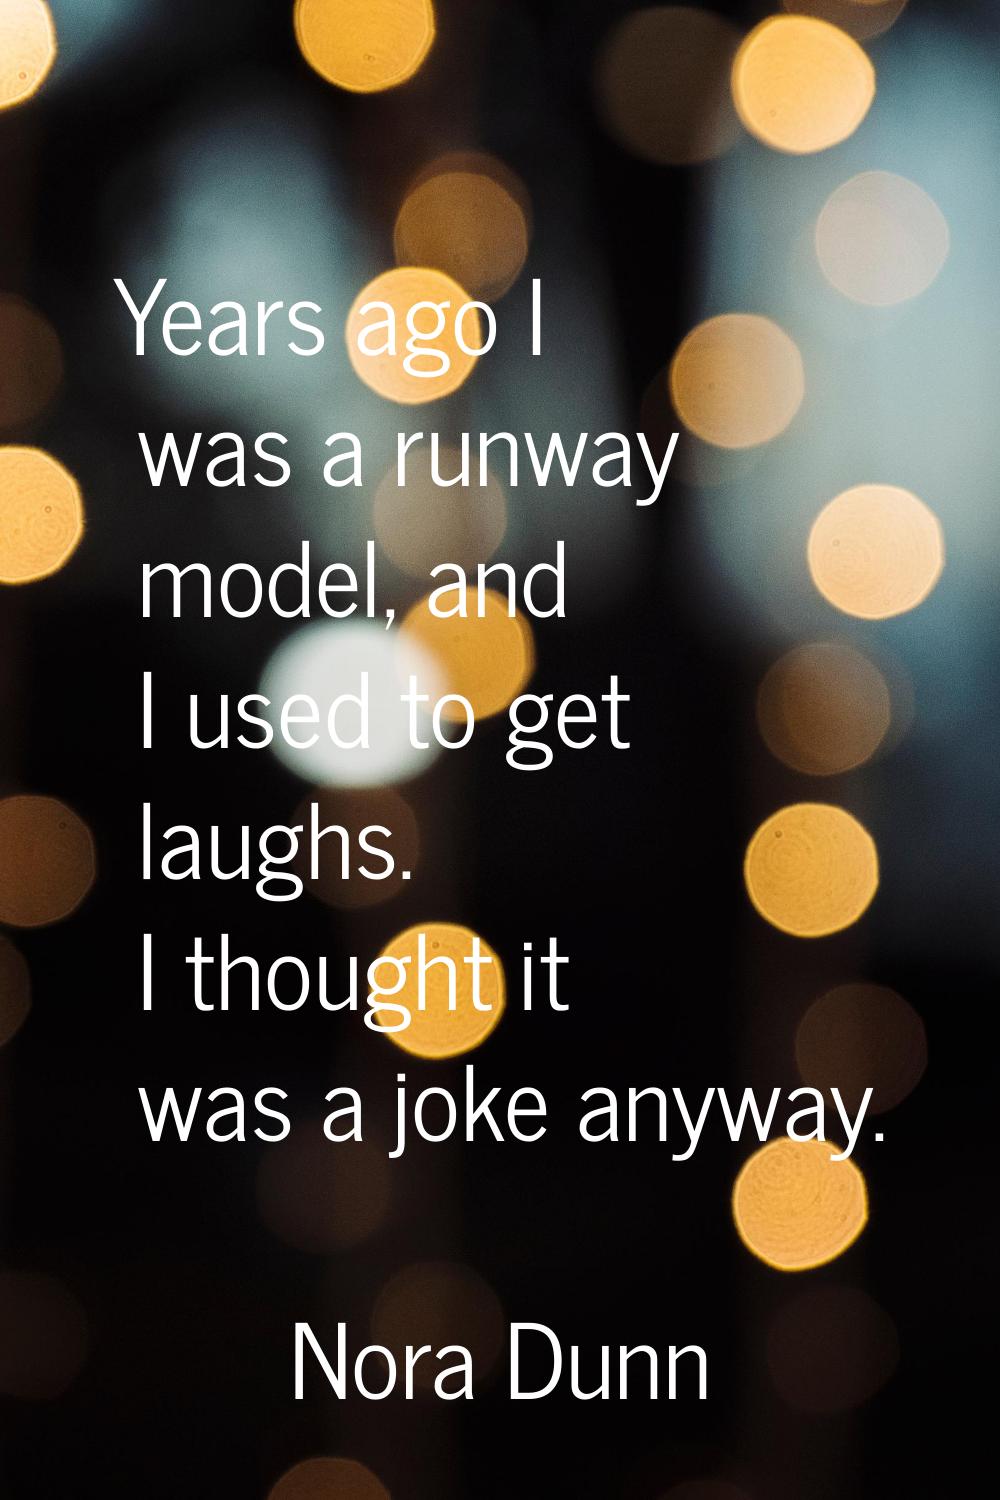 Years ago I was a runway model, and I used to get laughs. I thought it was a joke anyway.